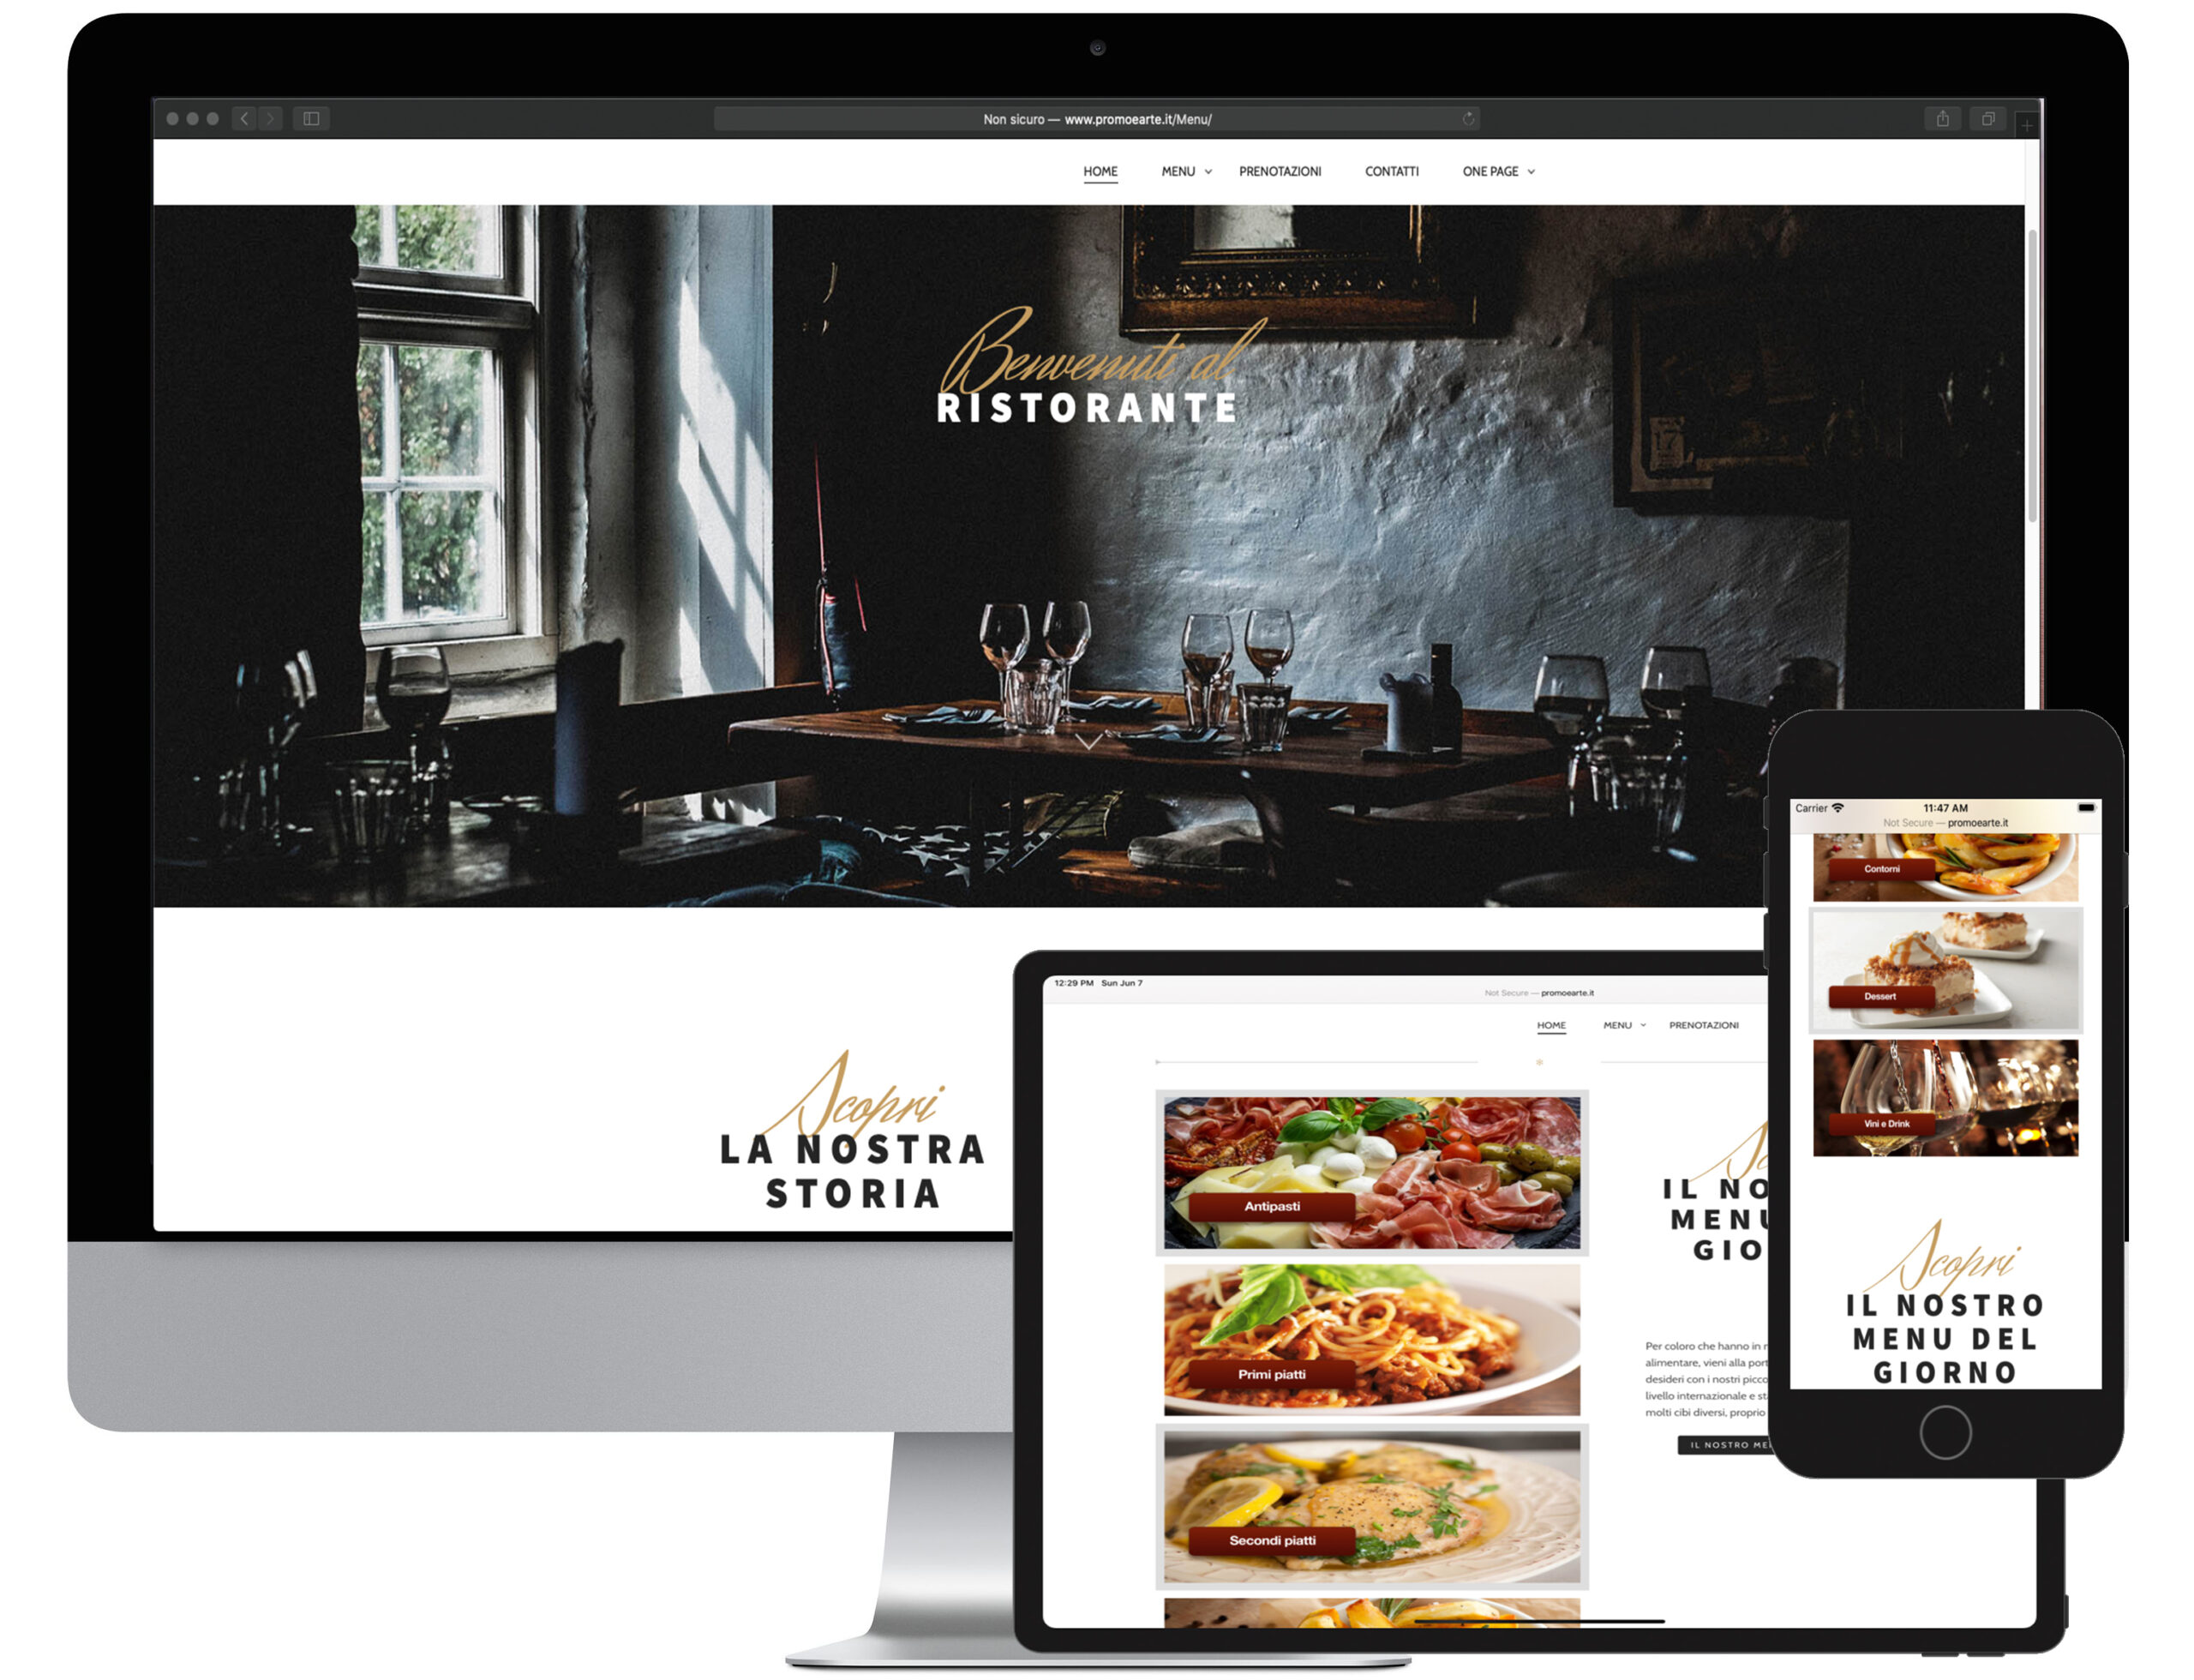 Restaurant menu and website for each device